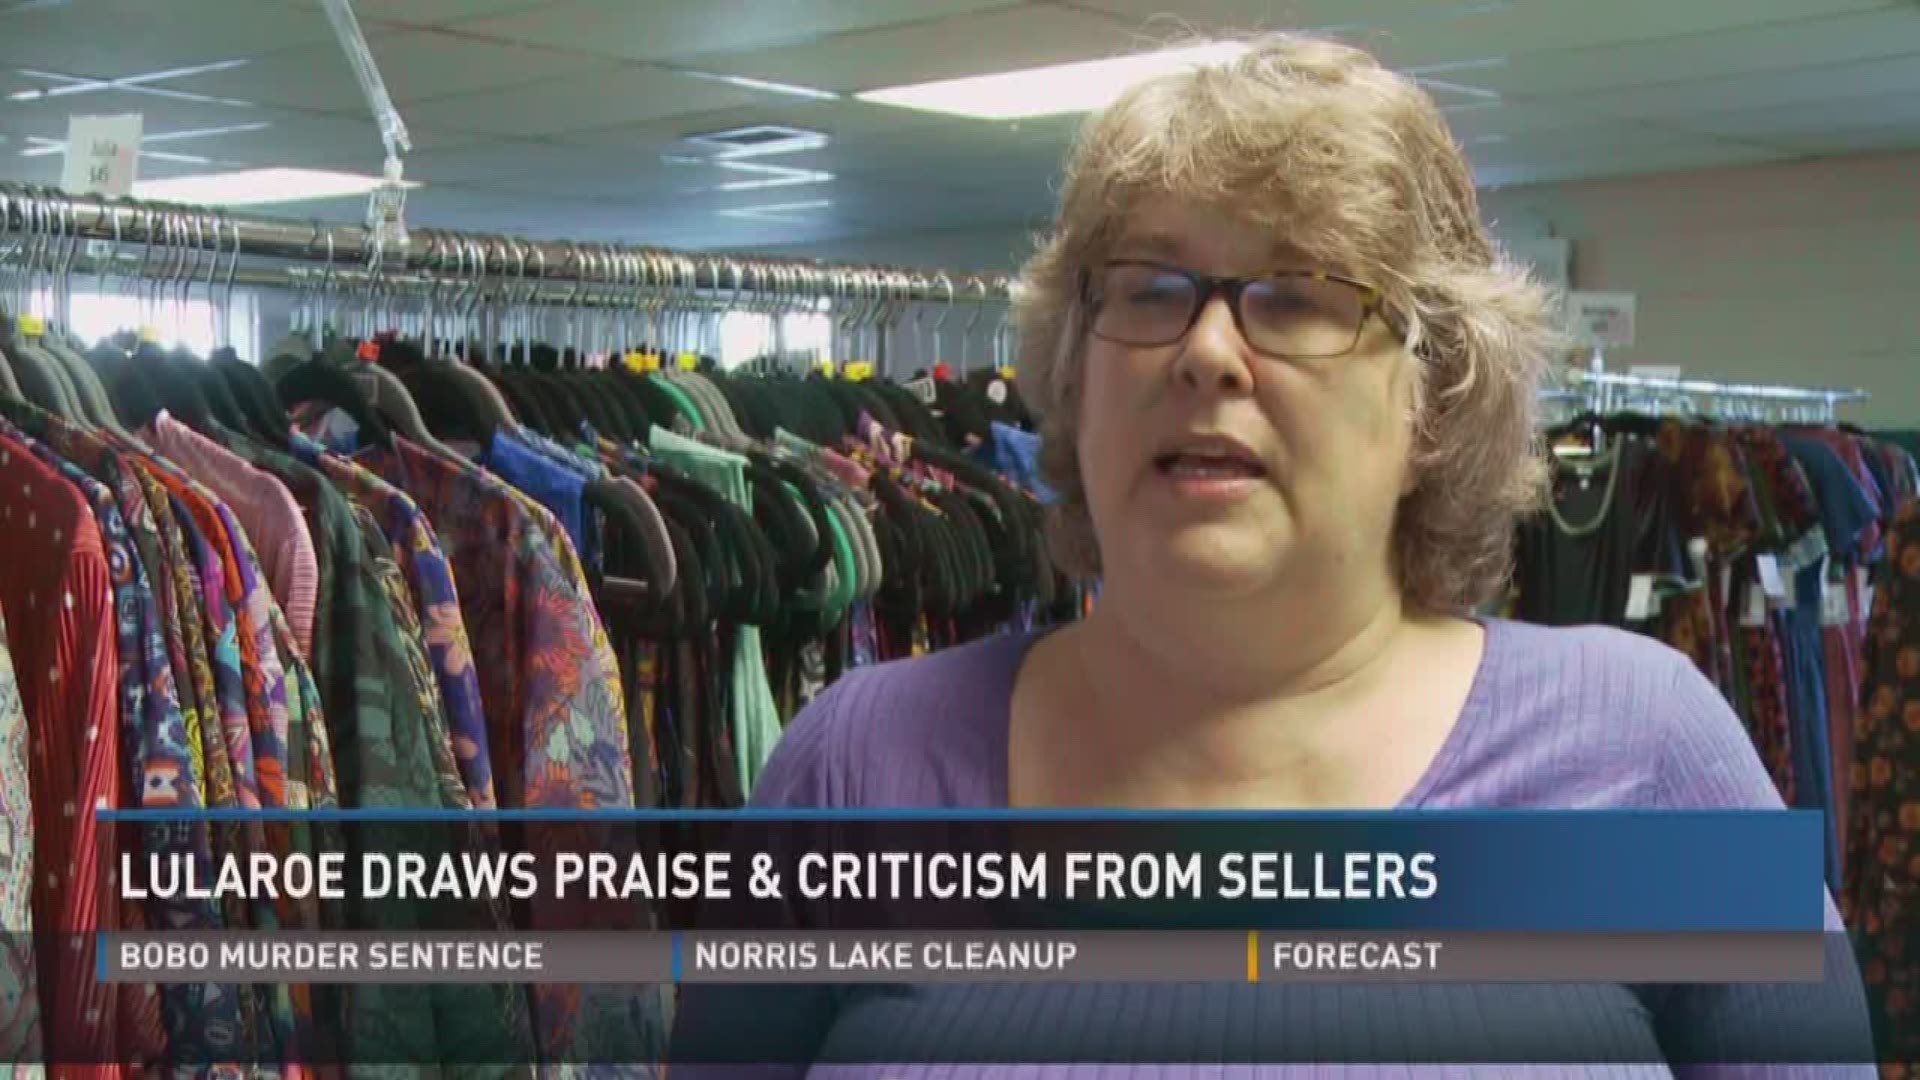 LuLaRoe draws praise and criticism from sellers.